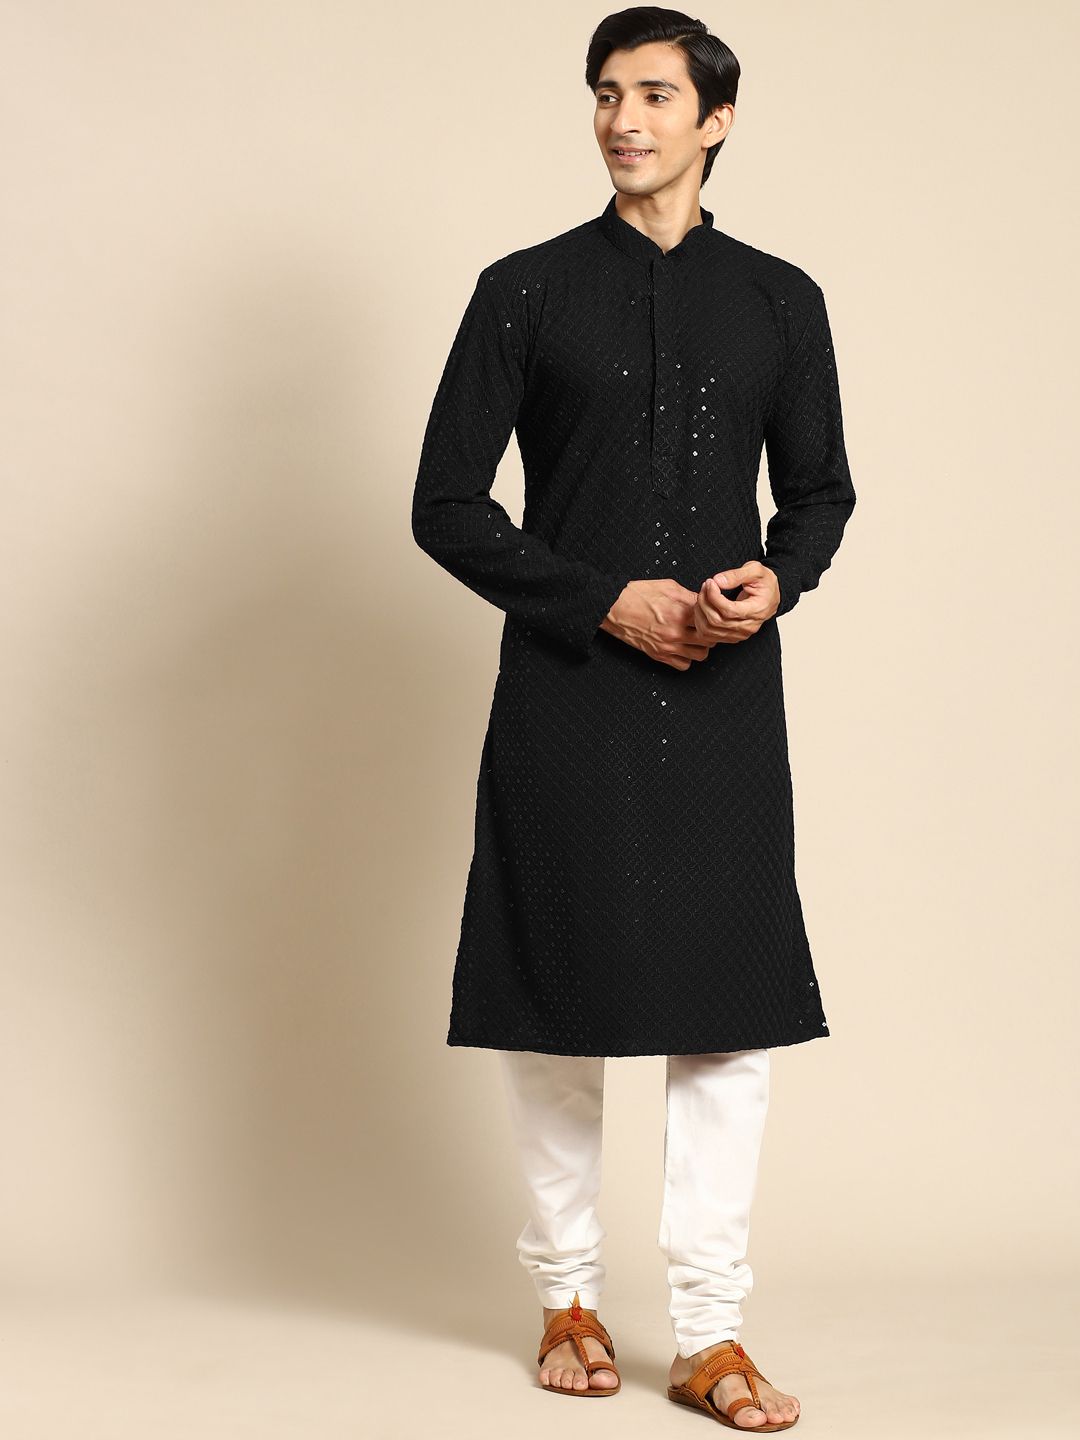 Discover more than 160 black kurta with black pants - in.eteachers